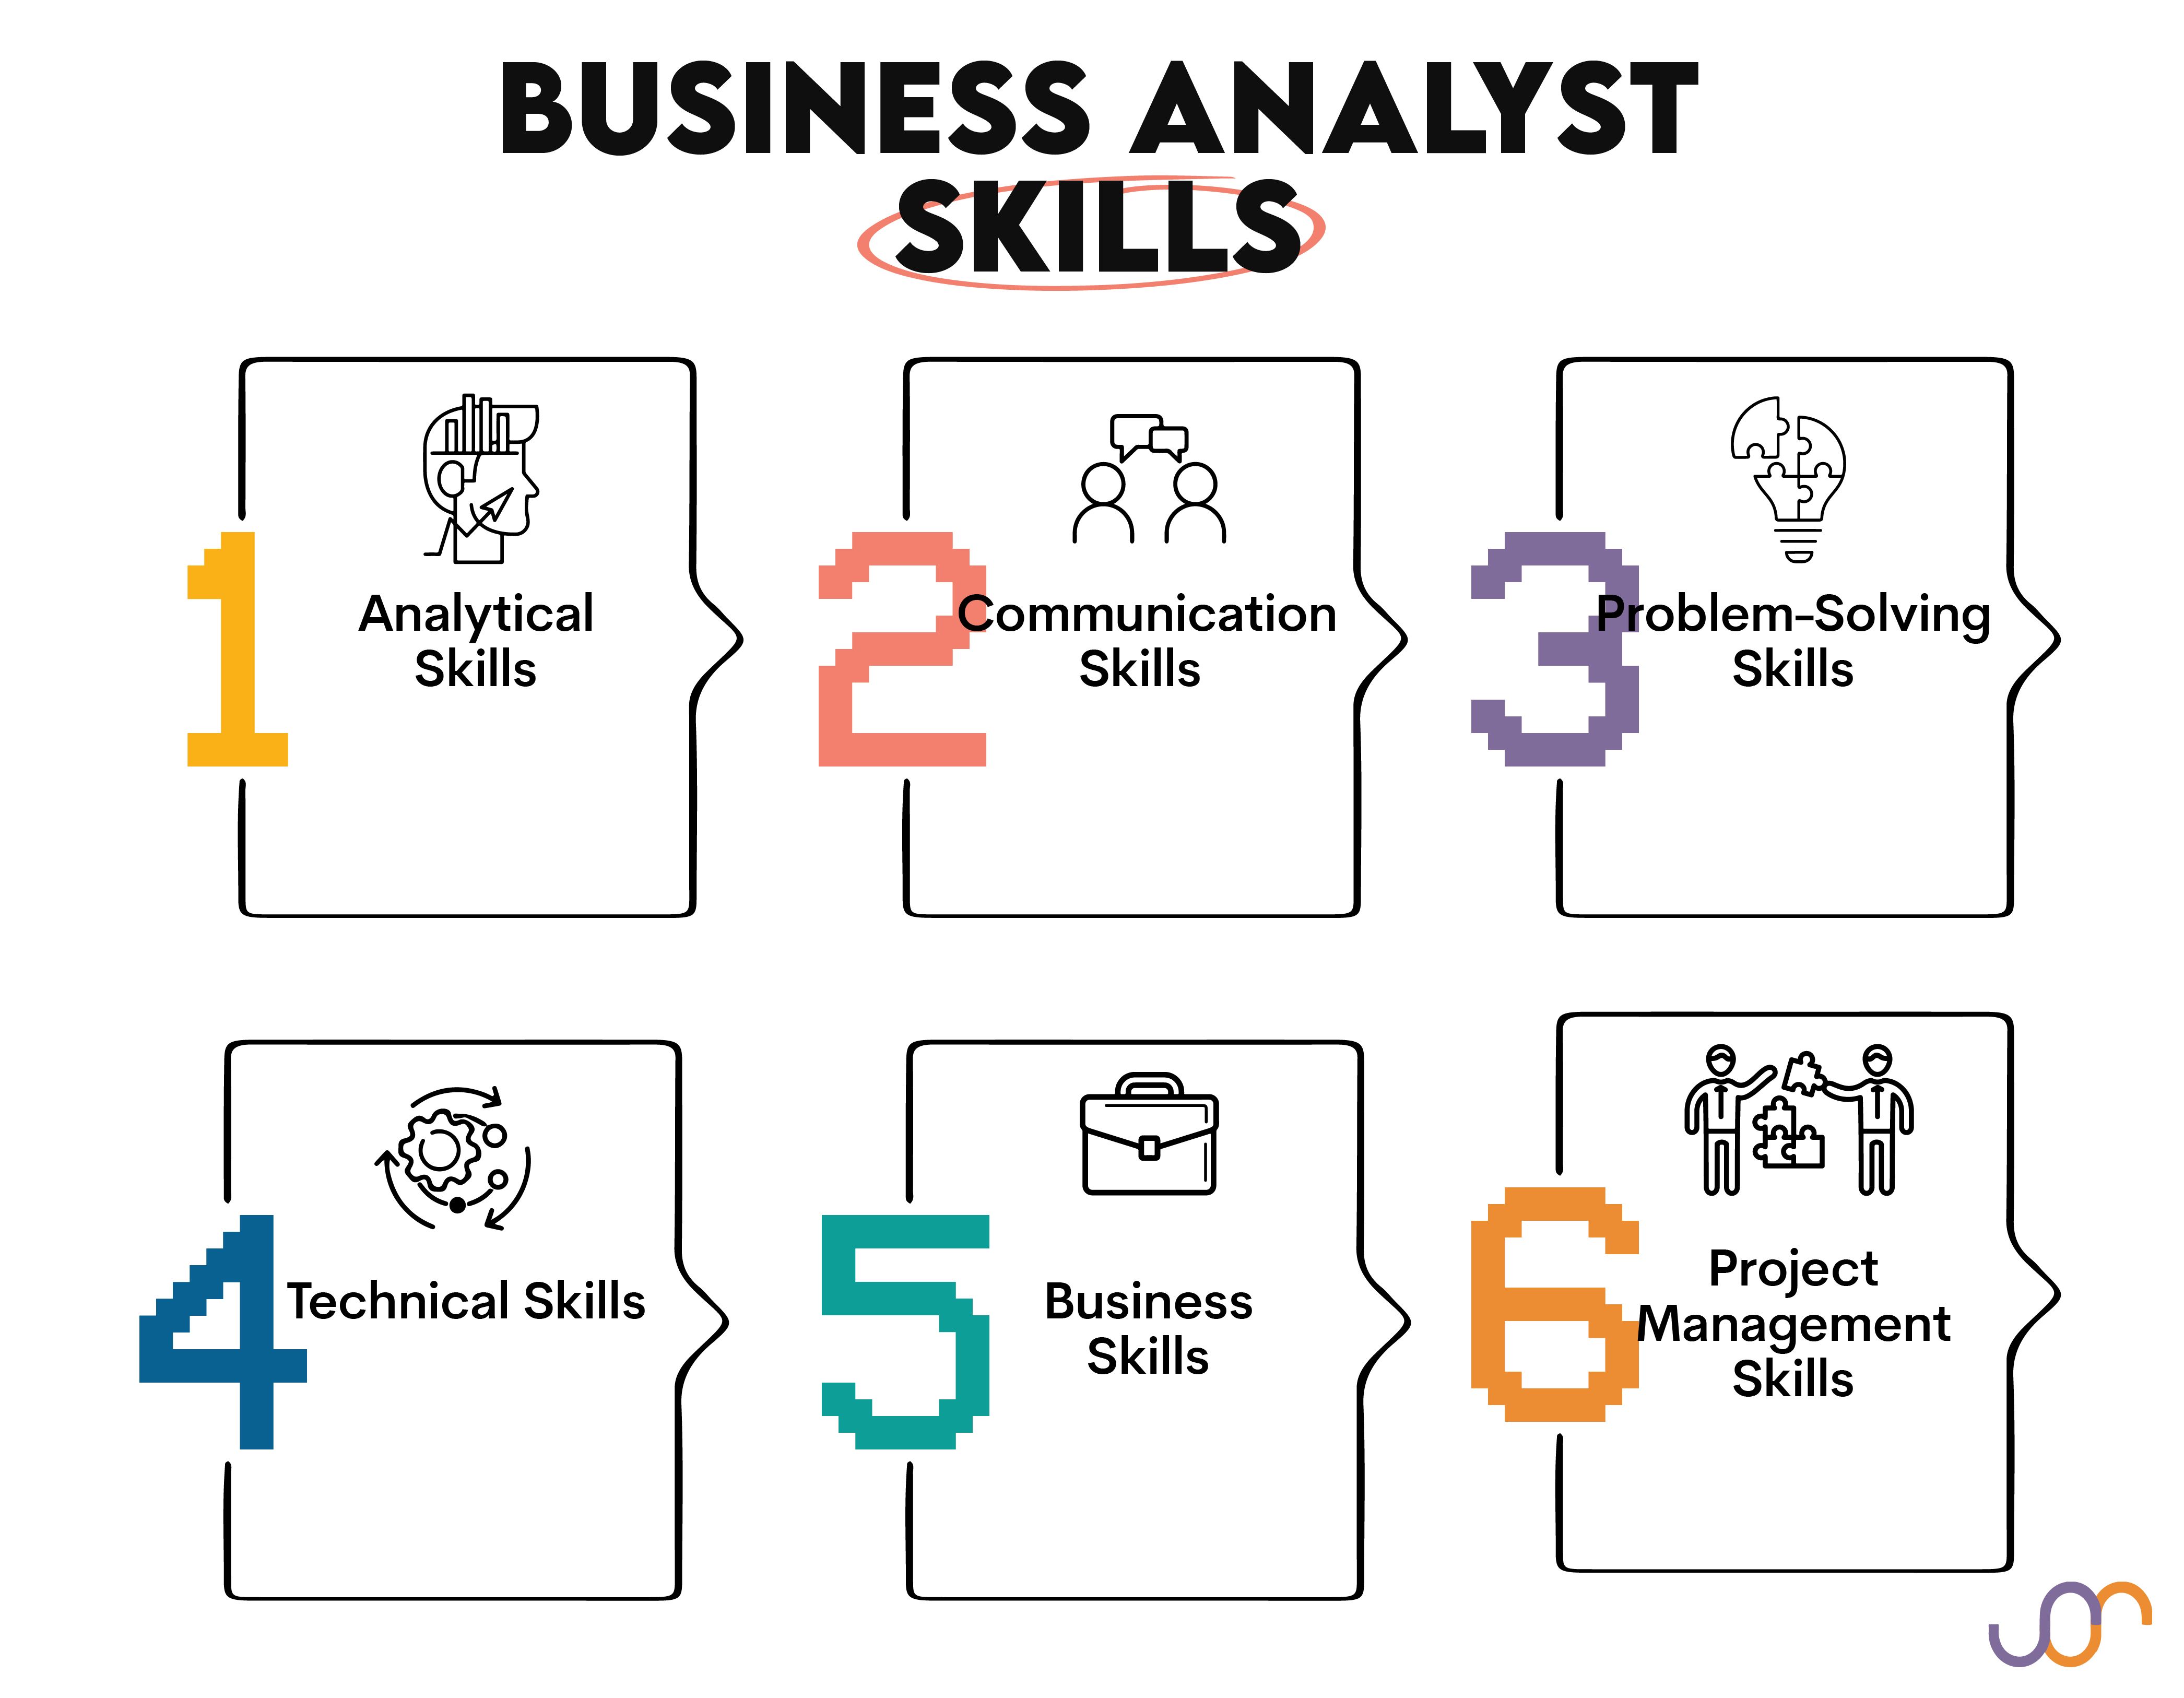 What are the Skills required to become a Business Analyst